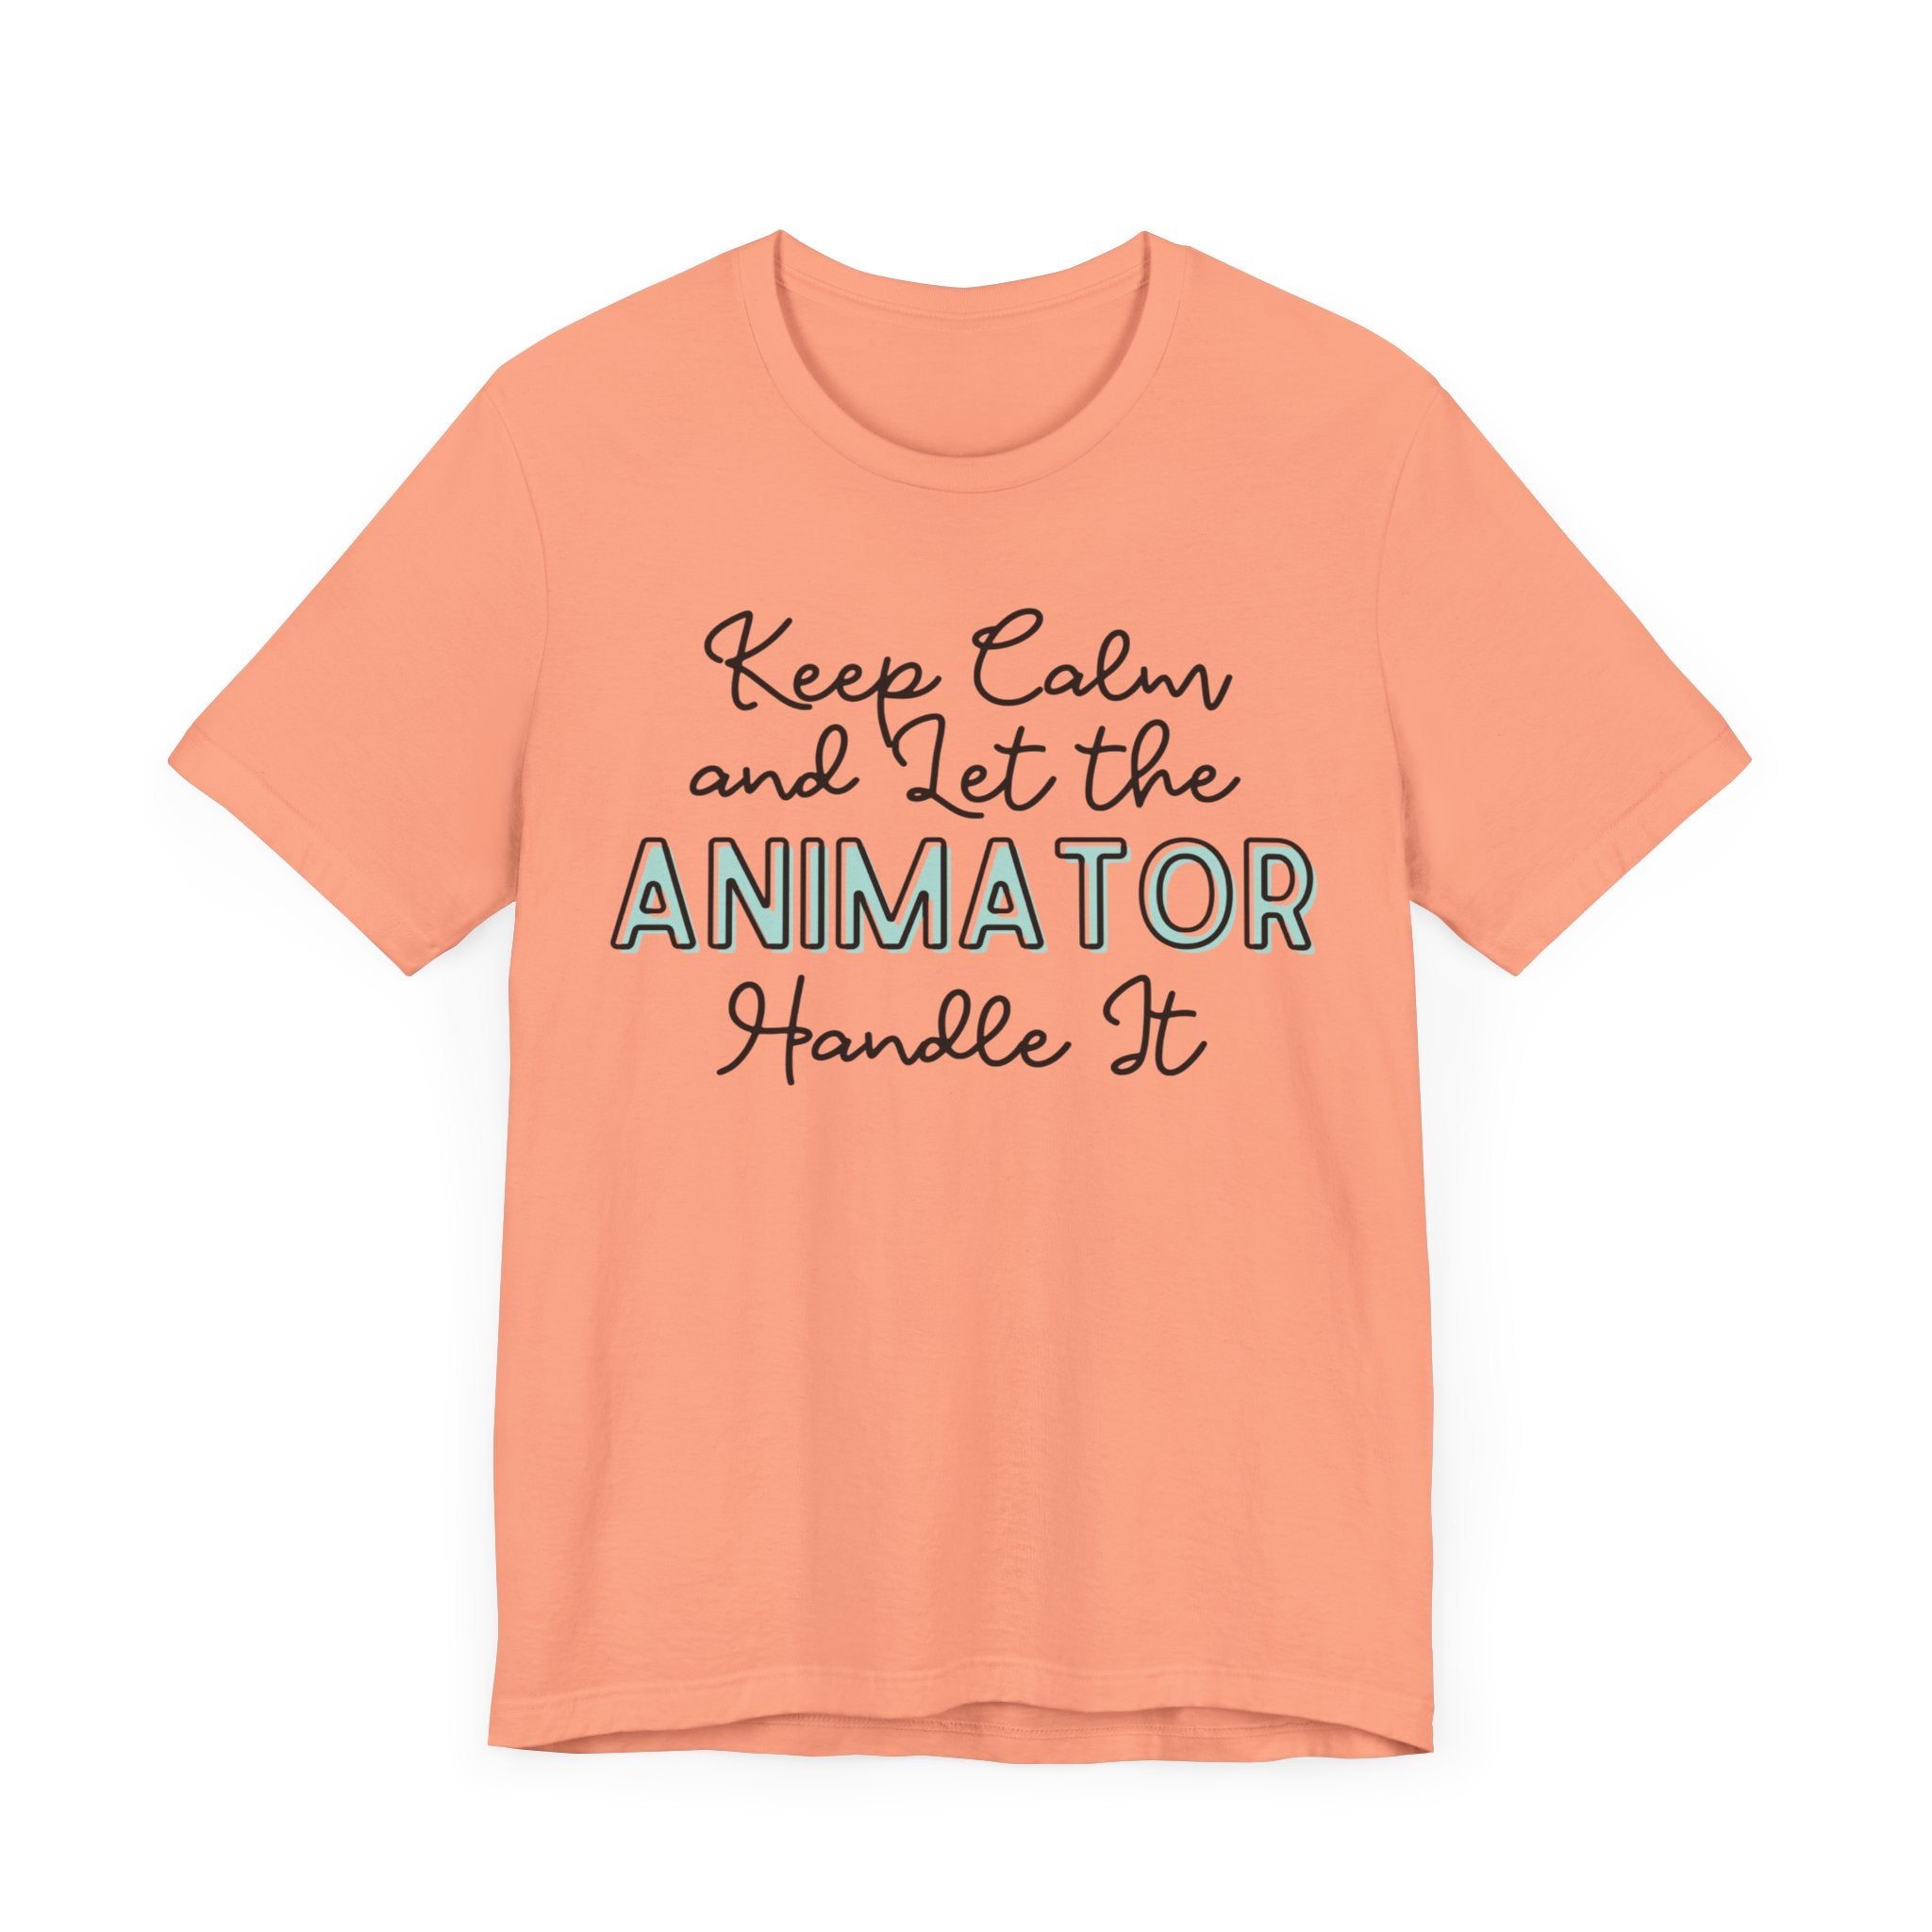 Keep Calm and let the Animator handle It - Jersey Short Sleeve Tee